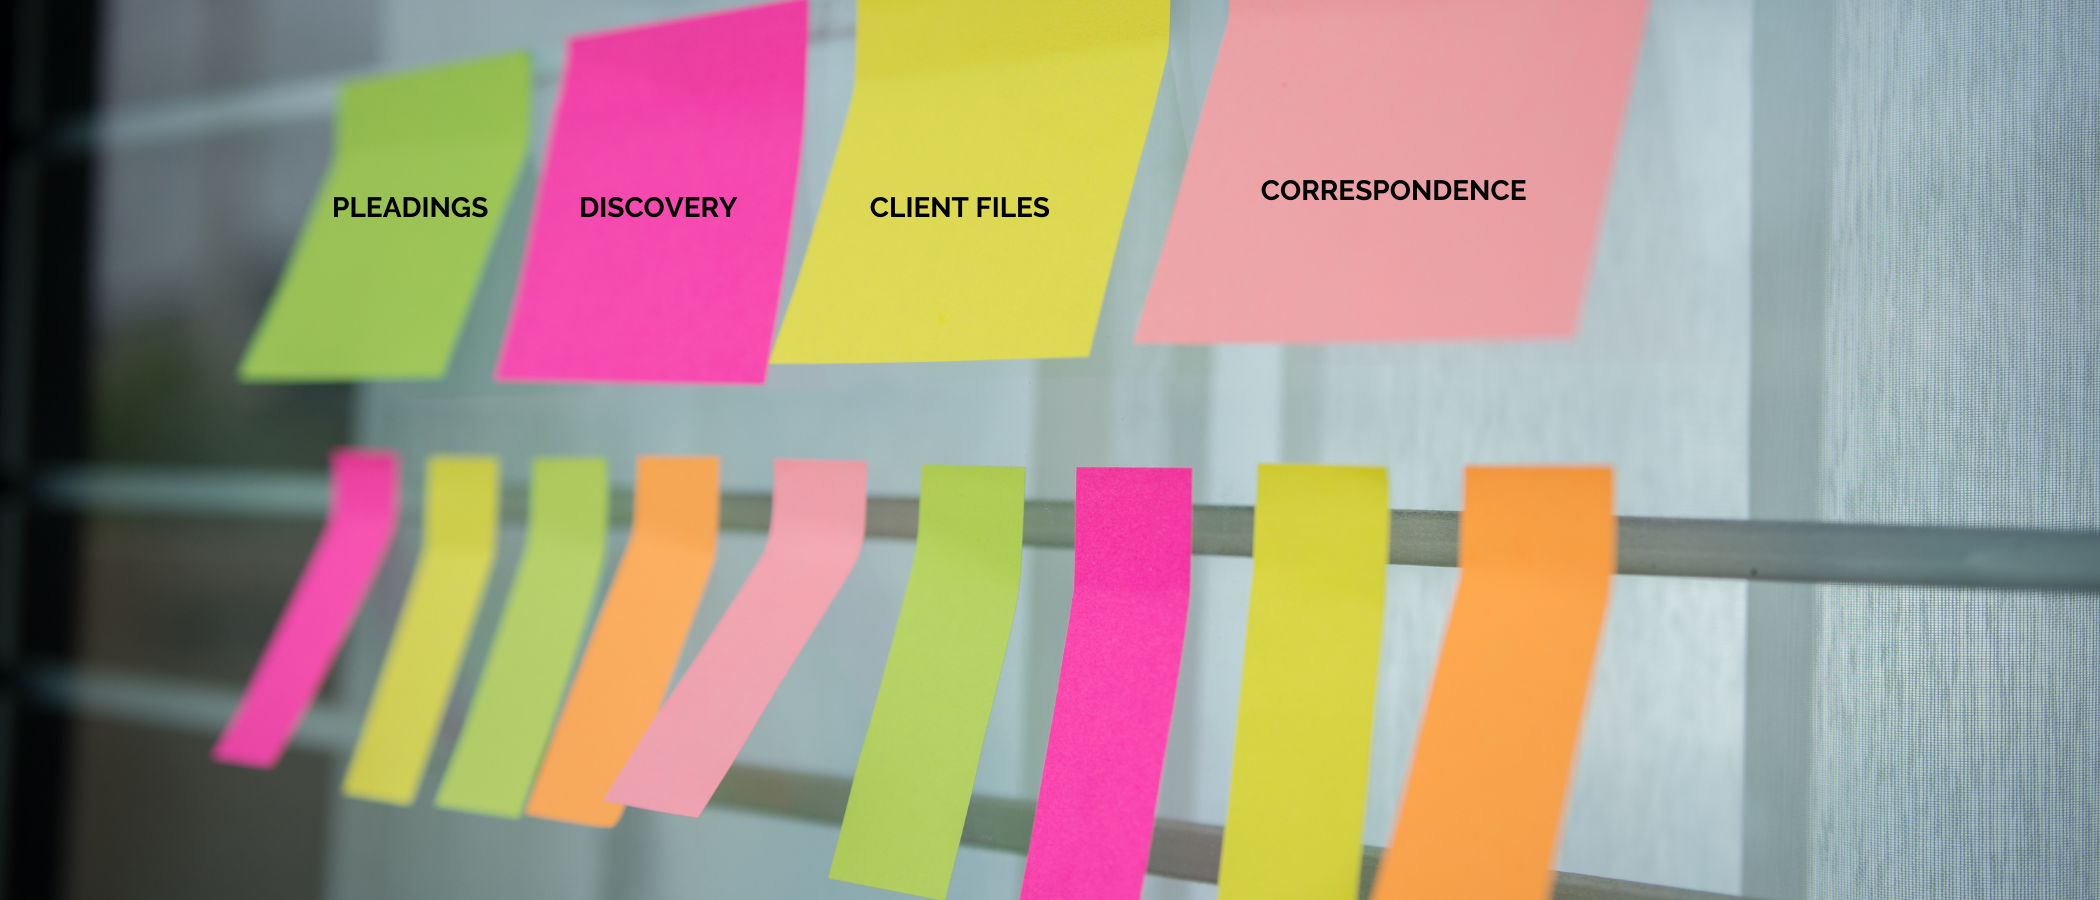 Colorful sticky notes used to classify different information for a legal case